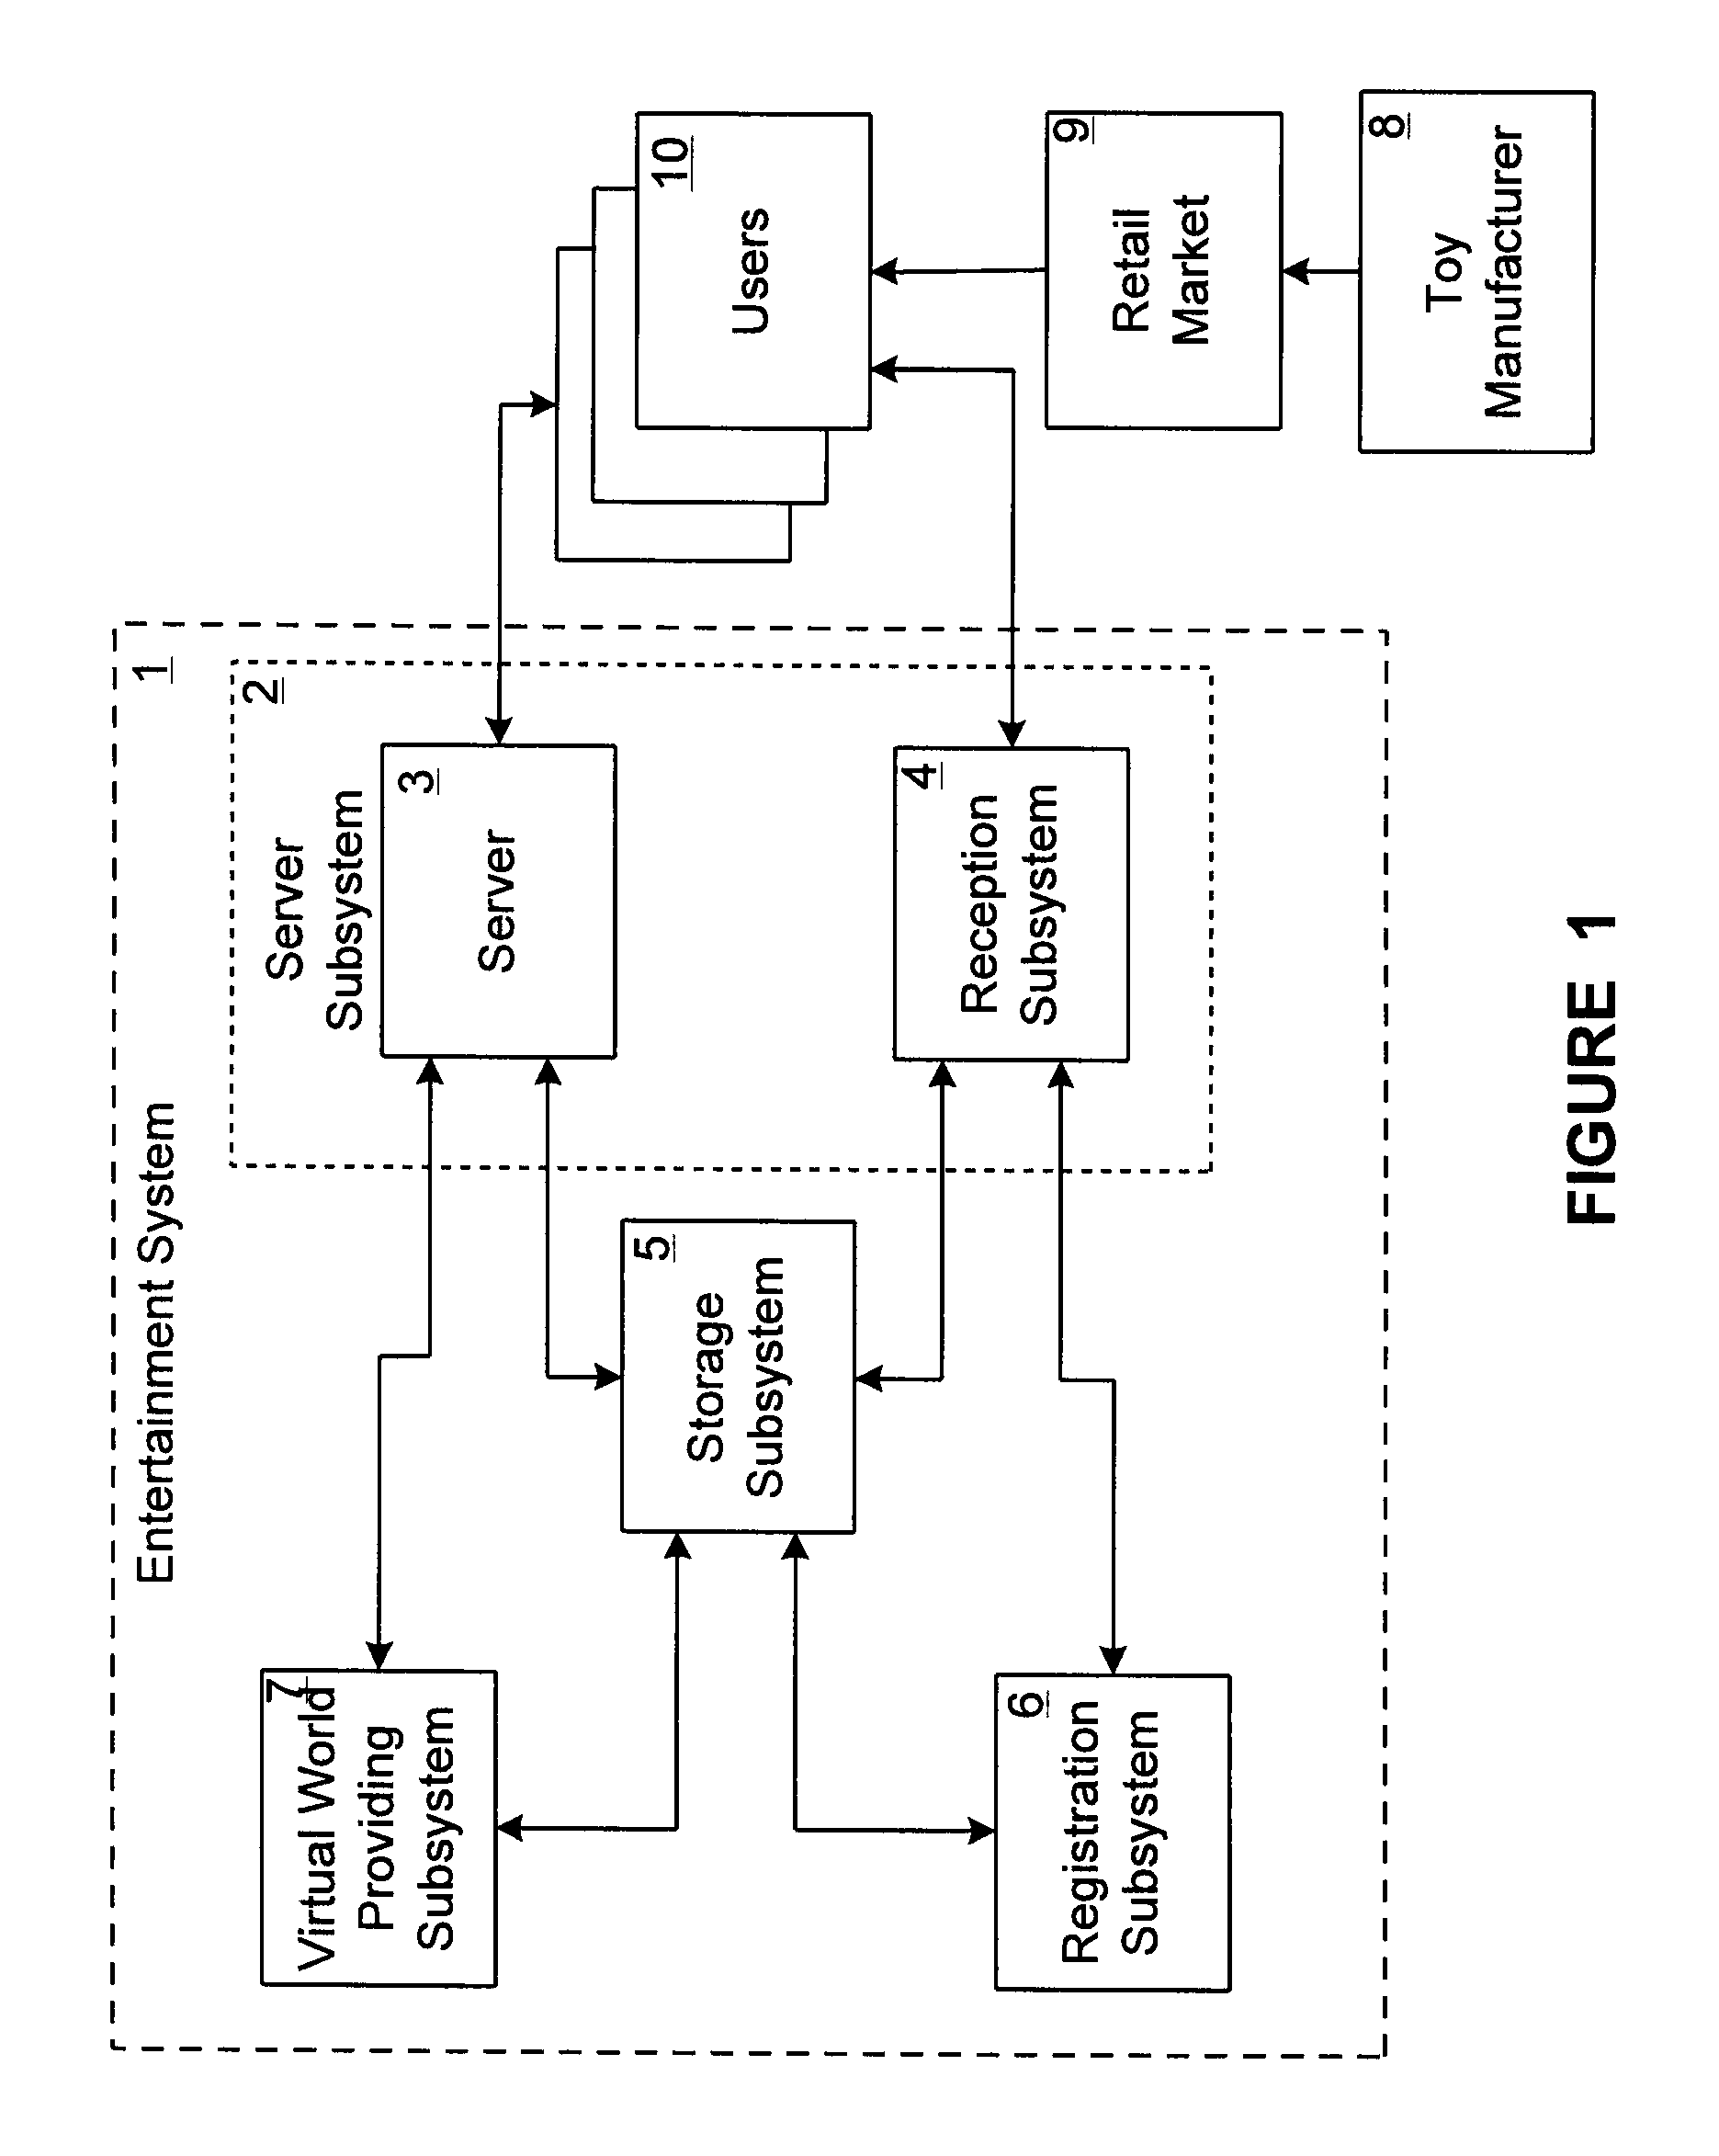 System and method for generating a virtual environment for land-based and underwater virtual characters